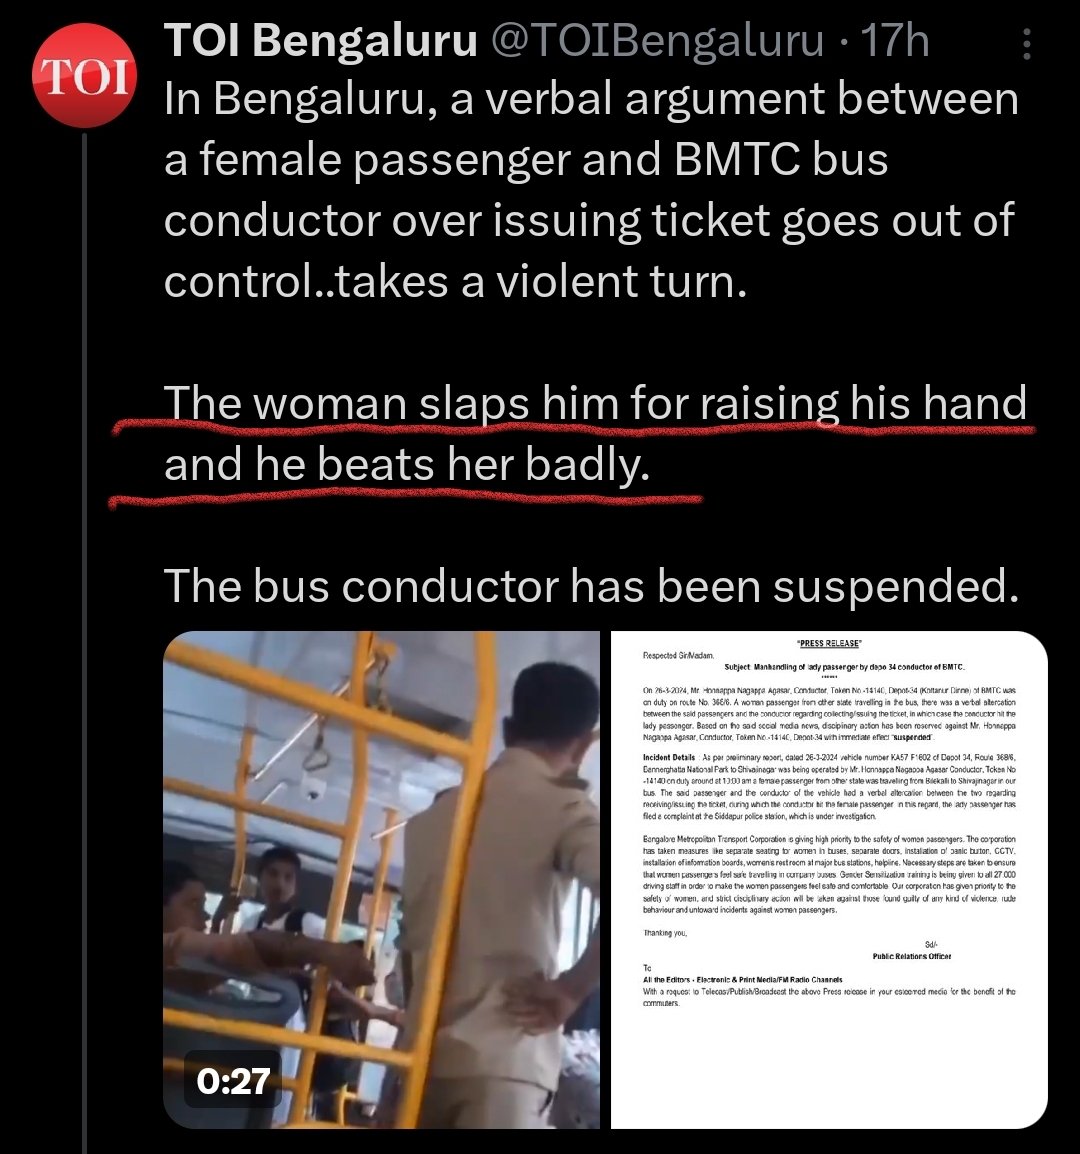 #Justice4BusConductor
If you women then you can misuse the laws in India!!!
@CPBlr